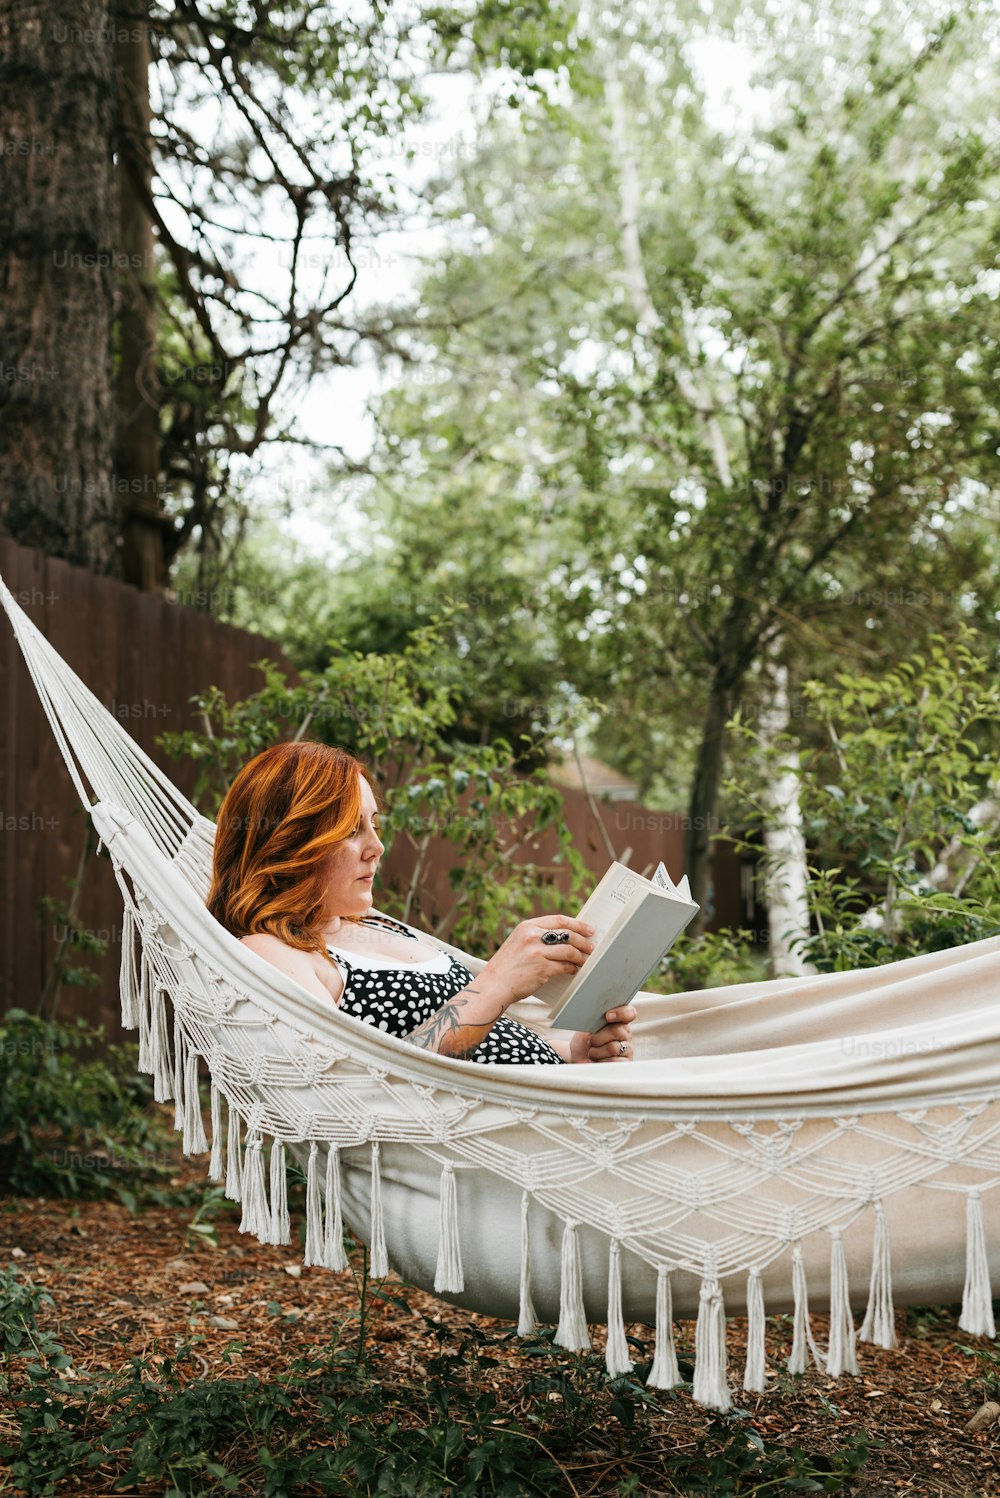 a woman sitting in a hammock reading a book